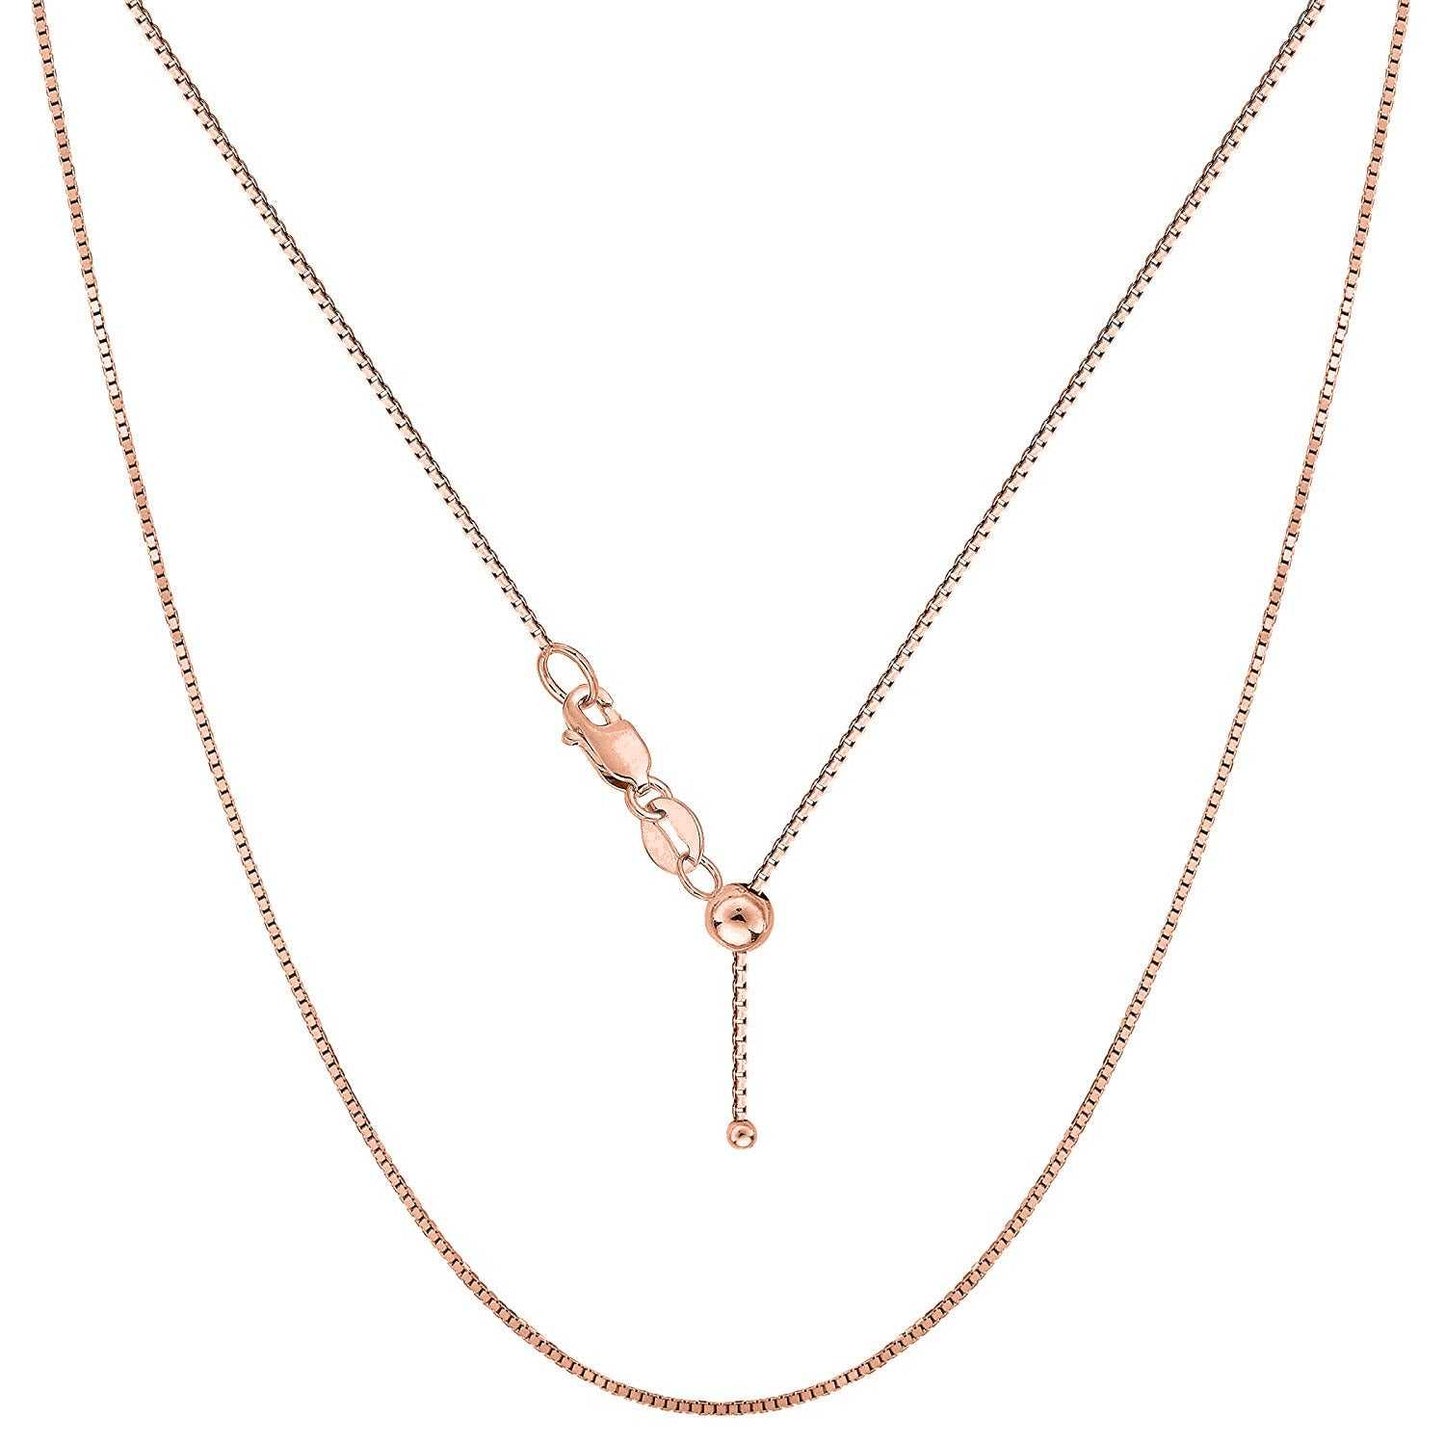 Rose Gold Italian Sterling Silver Adjustable Box Chain Necklace